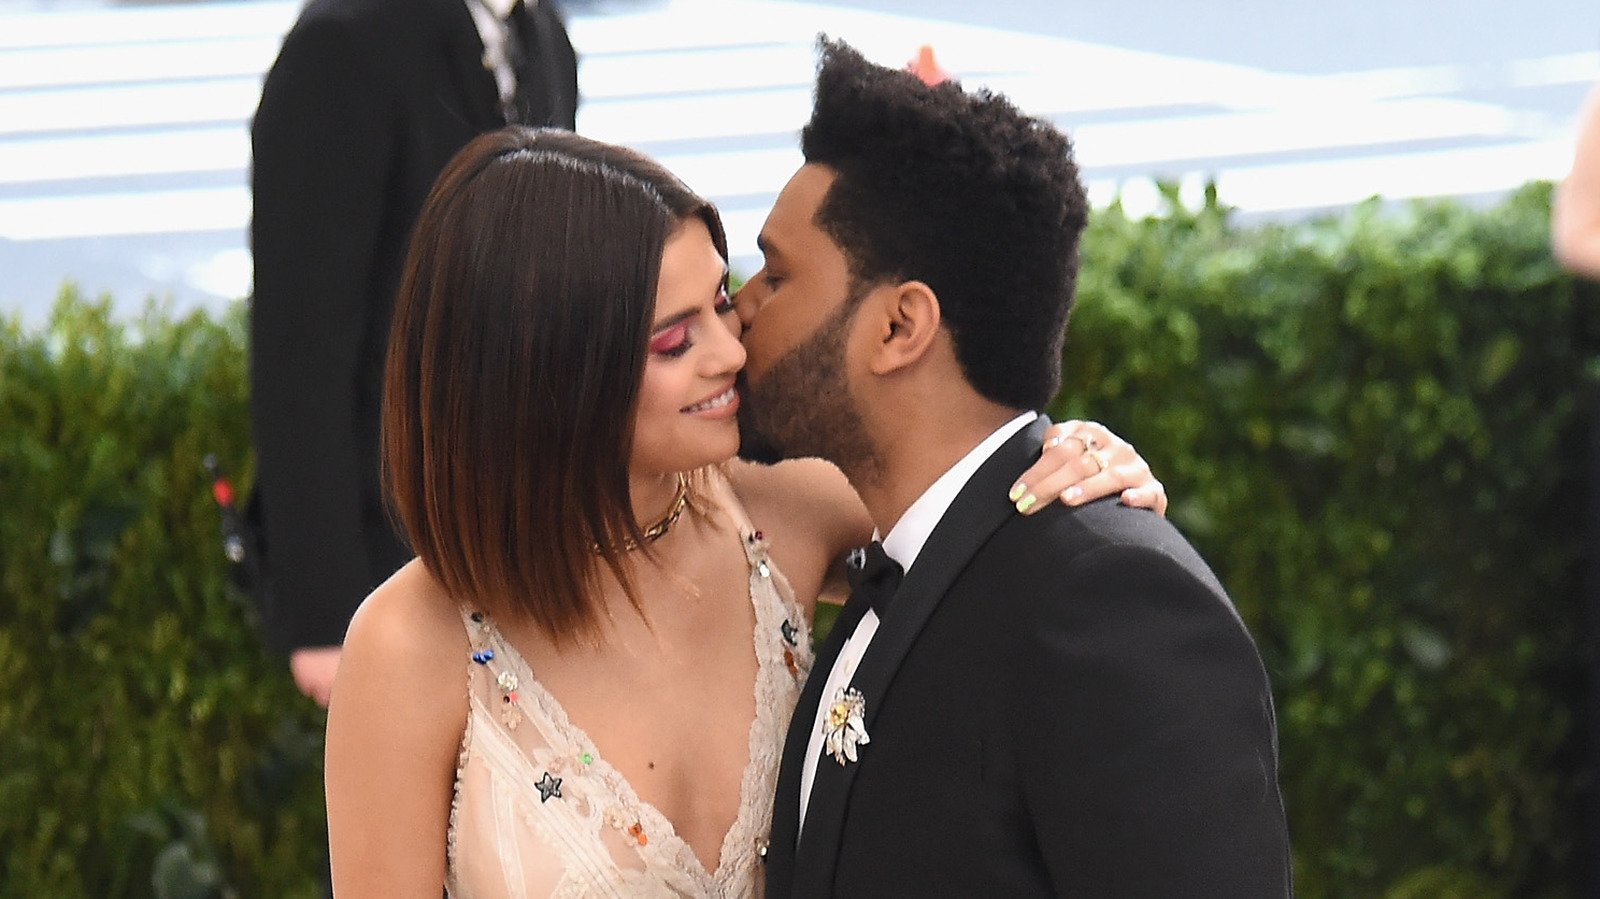 The Truth About The Weeknd's Relationship With Selena Gomez - Nicki Swift